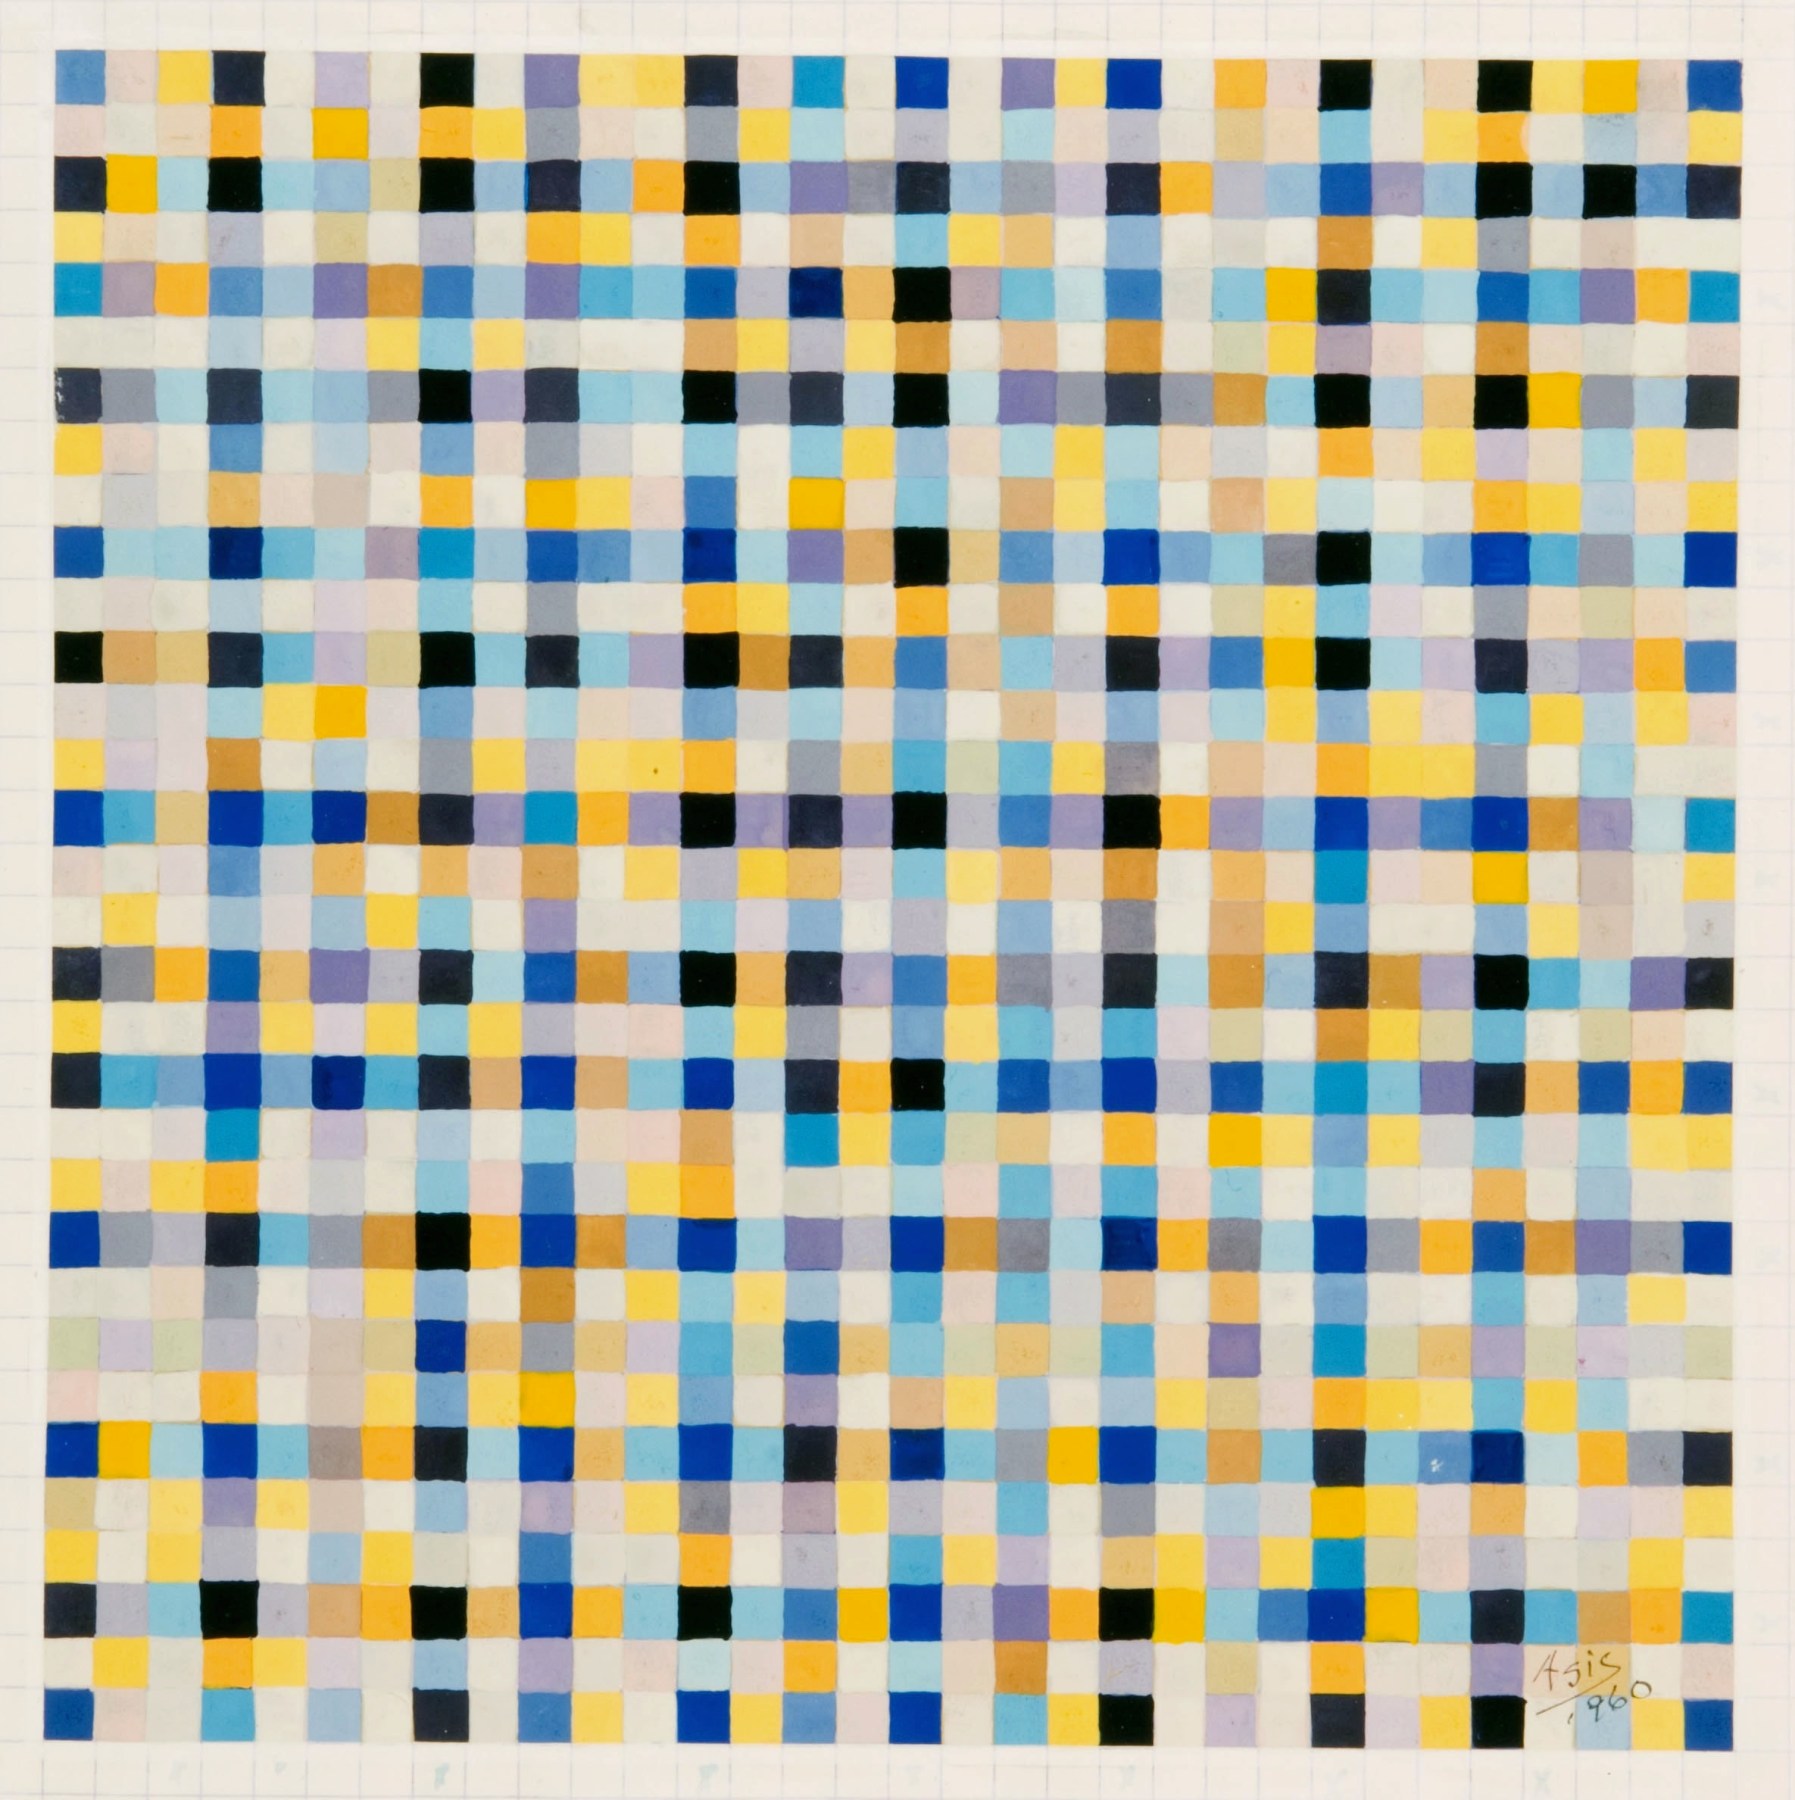 Antonio Asis,&nbsp;Untitled from the series Chromatisme Quadrill&eacute; Polychrome, 1960, Gouache on paper,&nbsp;6 1/4 x 6 3/16 in. (15.9 x 15.8 cm.)